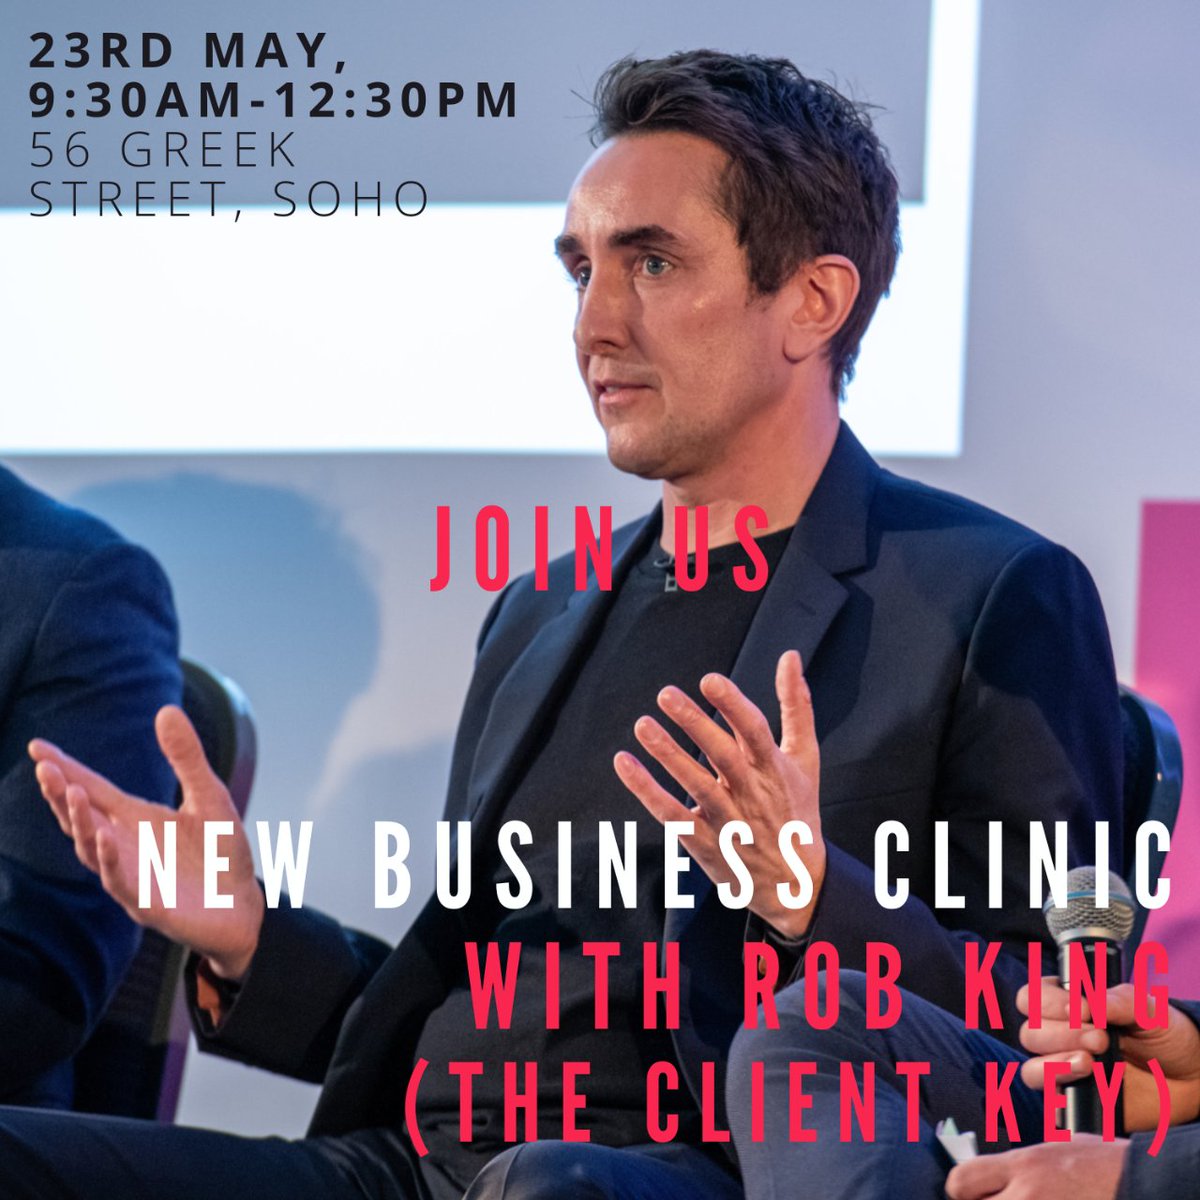 At our New Business Clinic on 23rd May, Rob King (The Client Key) will cover the landscape of agency sales, buyer behaviour & new technologies to help with growth. You'll solve your new biz challenges and learn how to better leverage your value! Book: cvent.me/MZ5Z4b